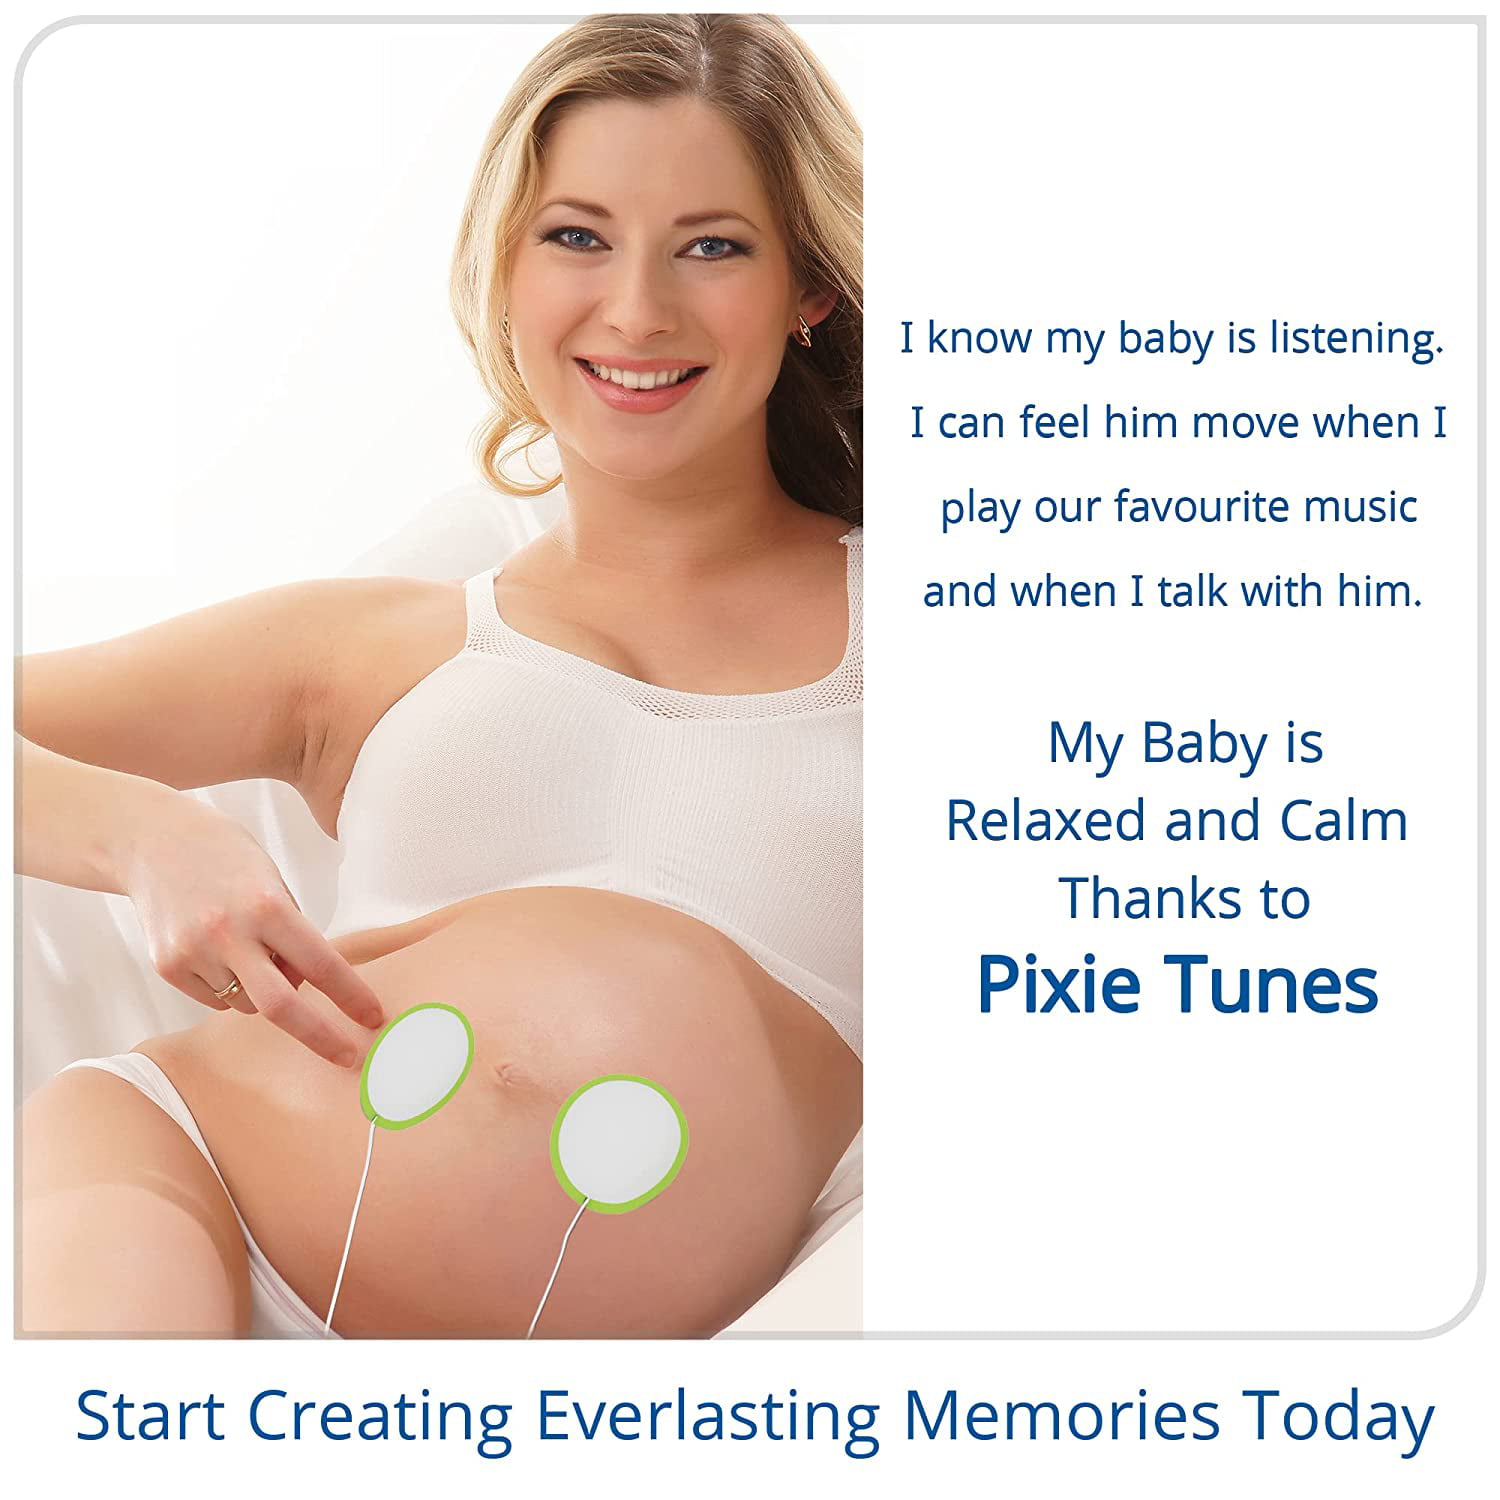 Pixie Tunes Premium Baby Bump Speaker System to Play Sound, Music and Talk to Your Baby in The Womb, White with Green Ring